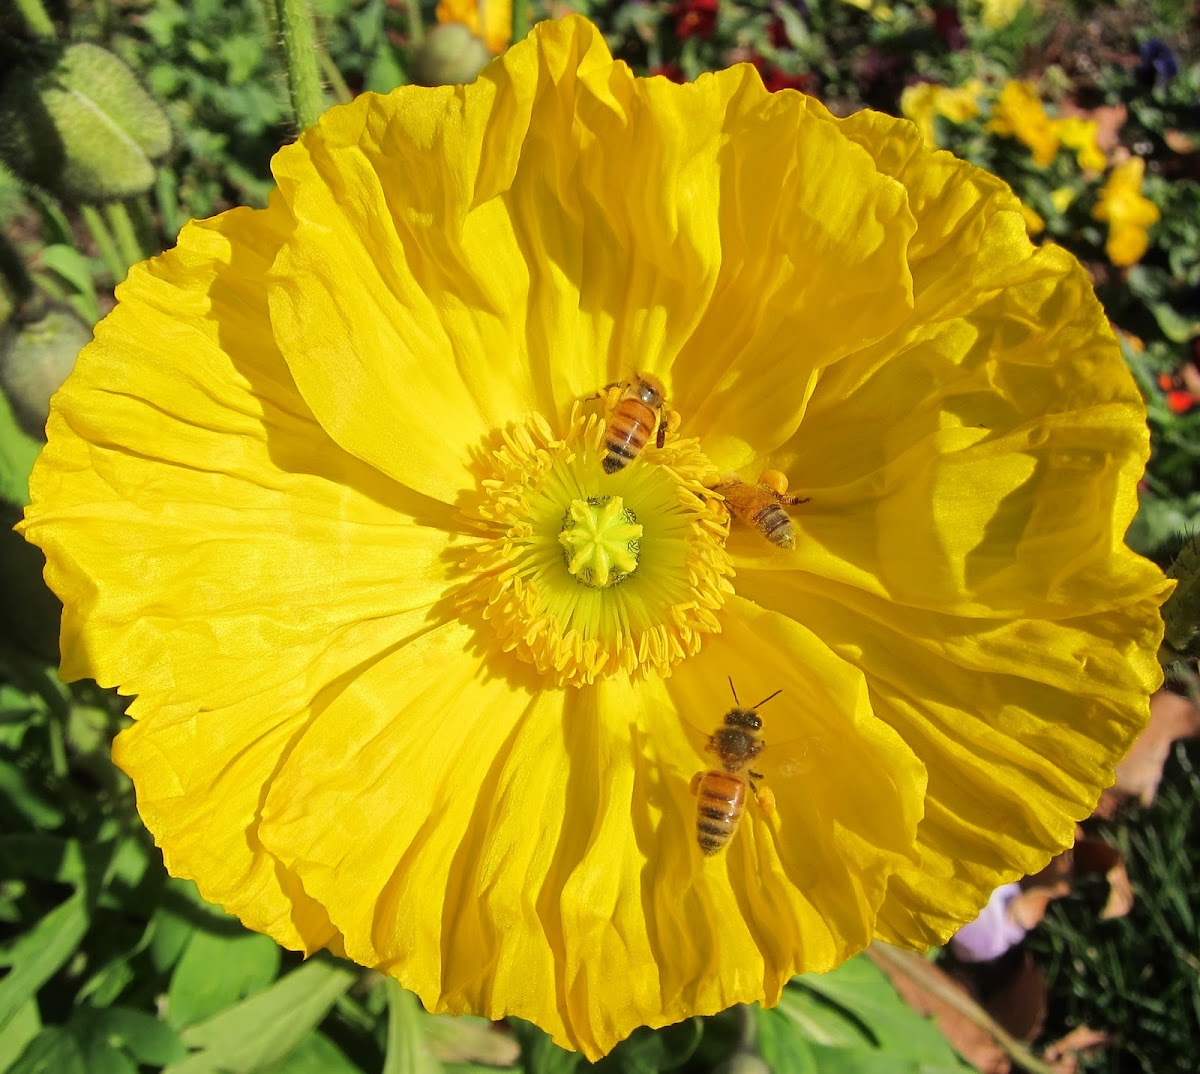 Iceland Poppies with Western Honey Bees